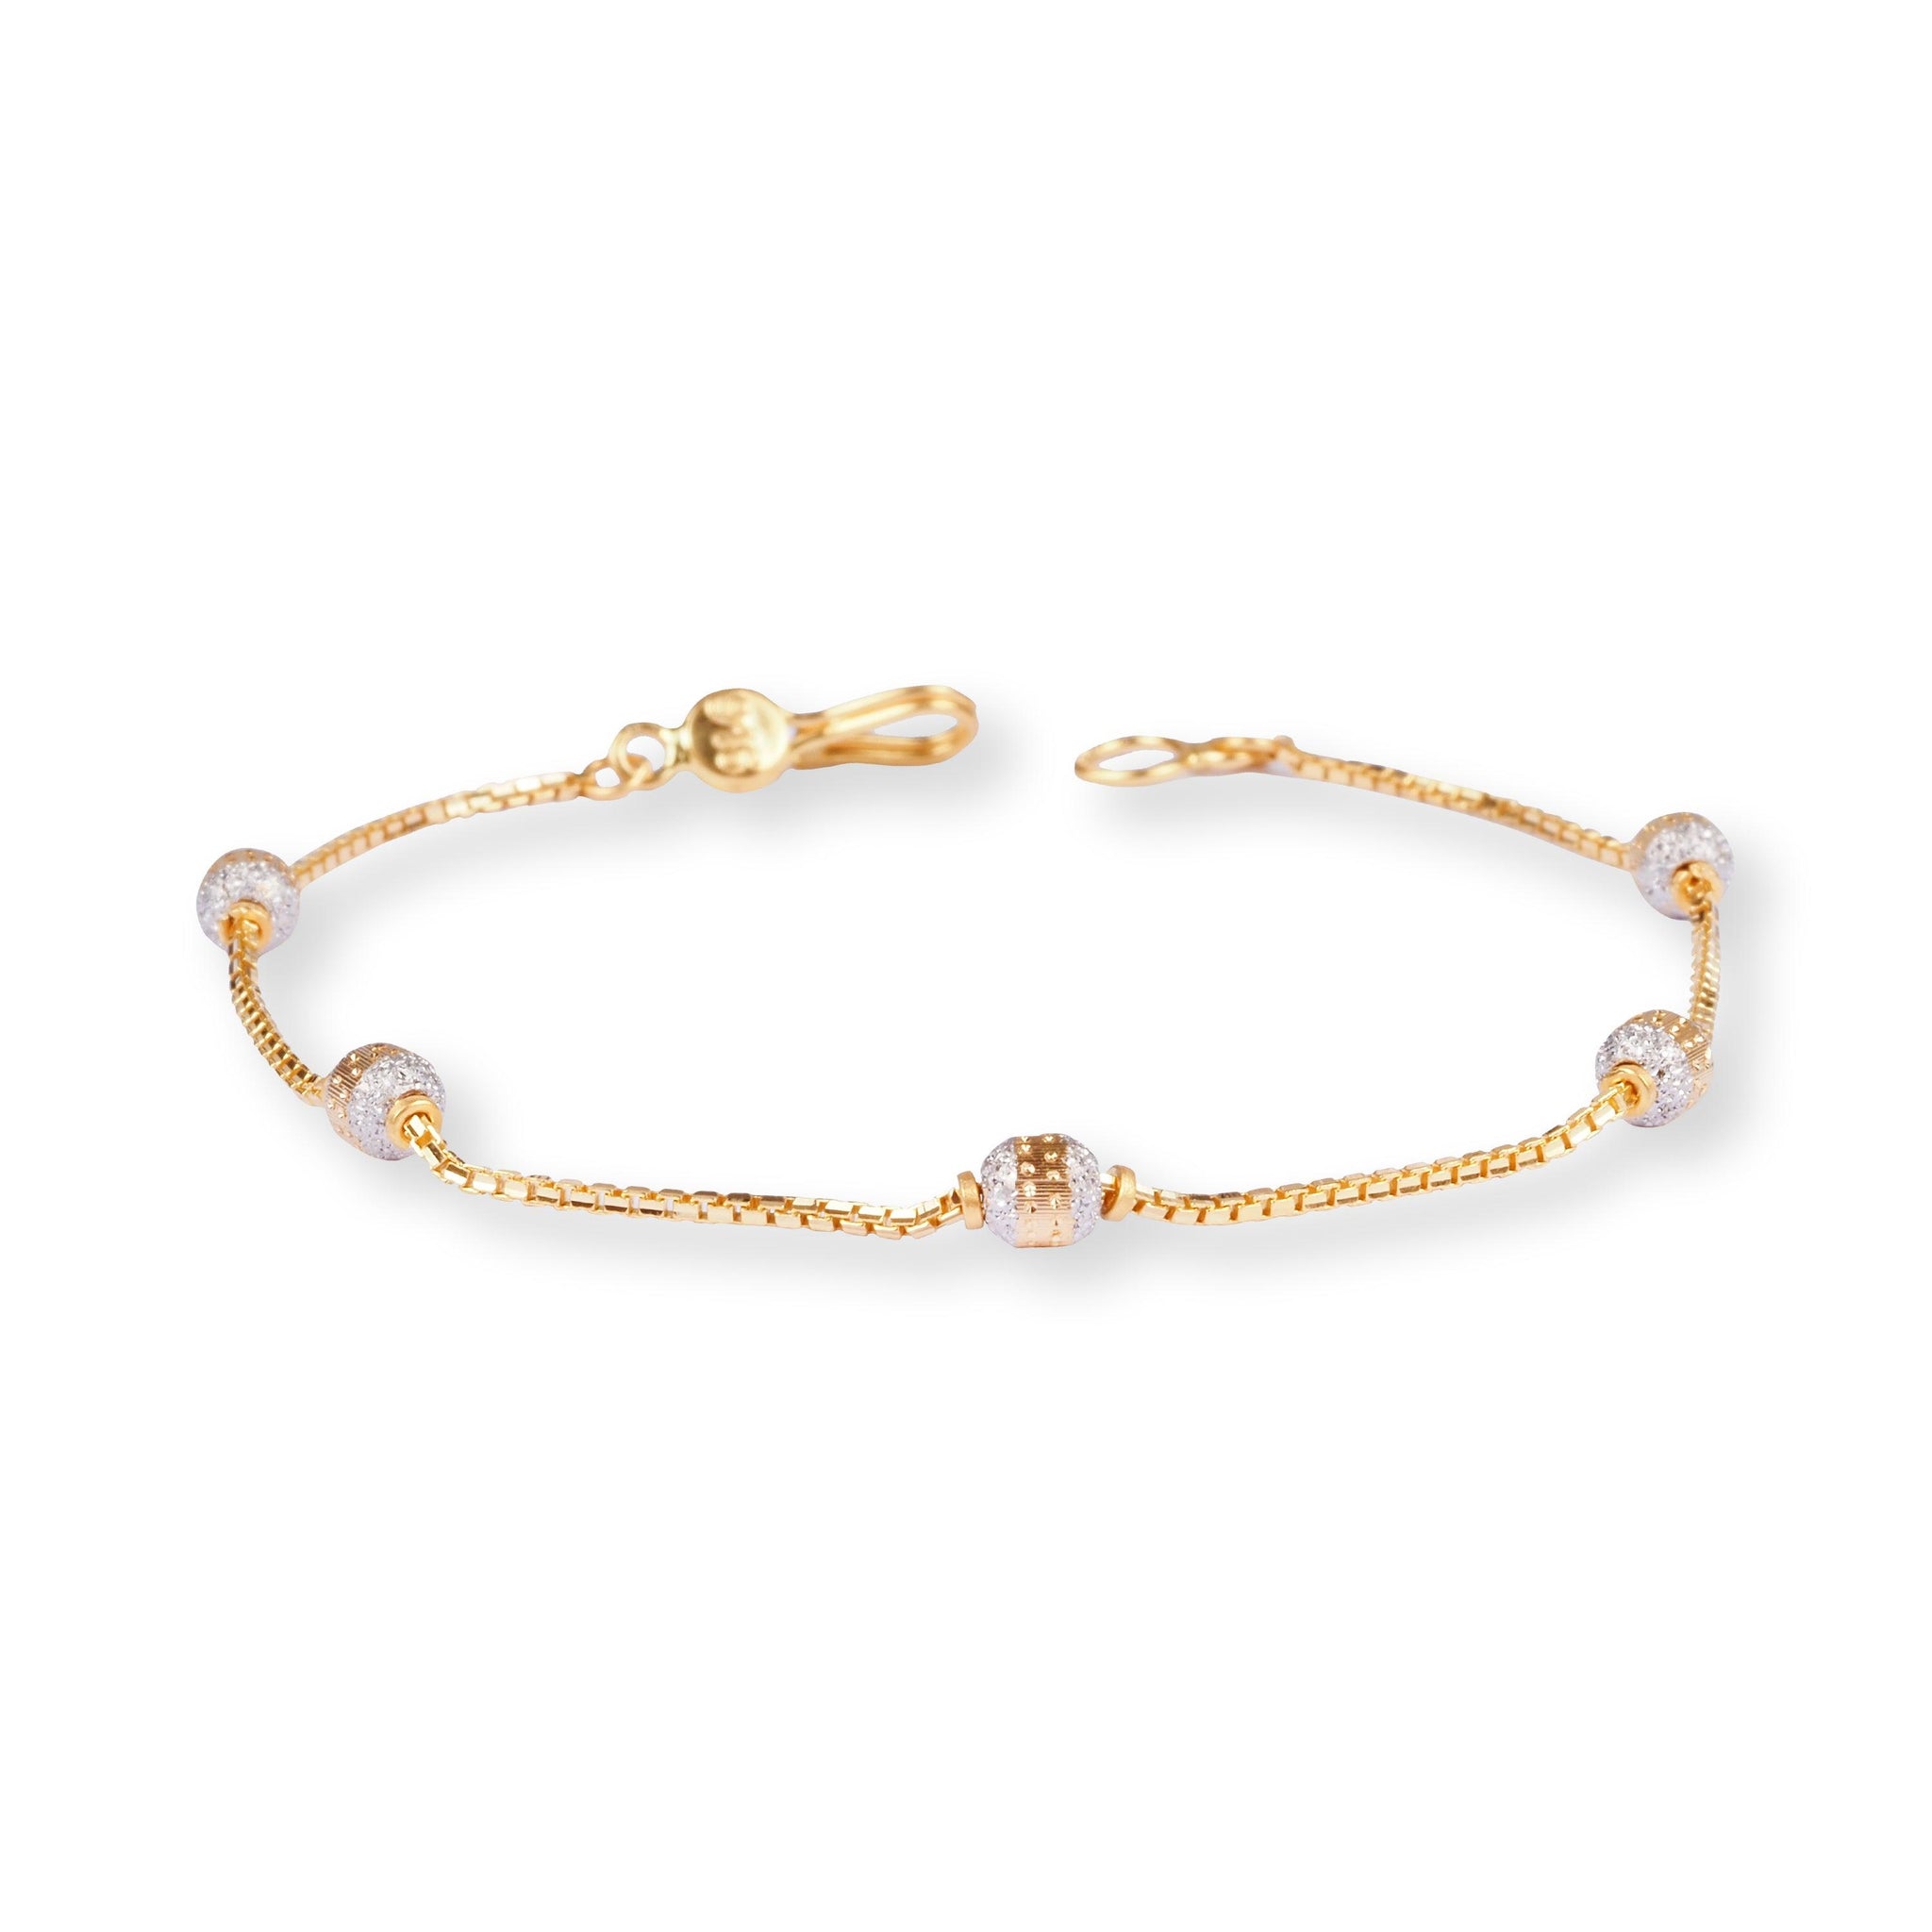 22ct Yellow Gold Bracelet with Diamond Cut Beads and Hook Clasp LBR-8495